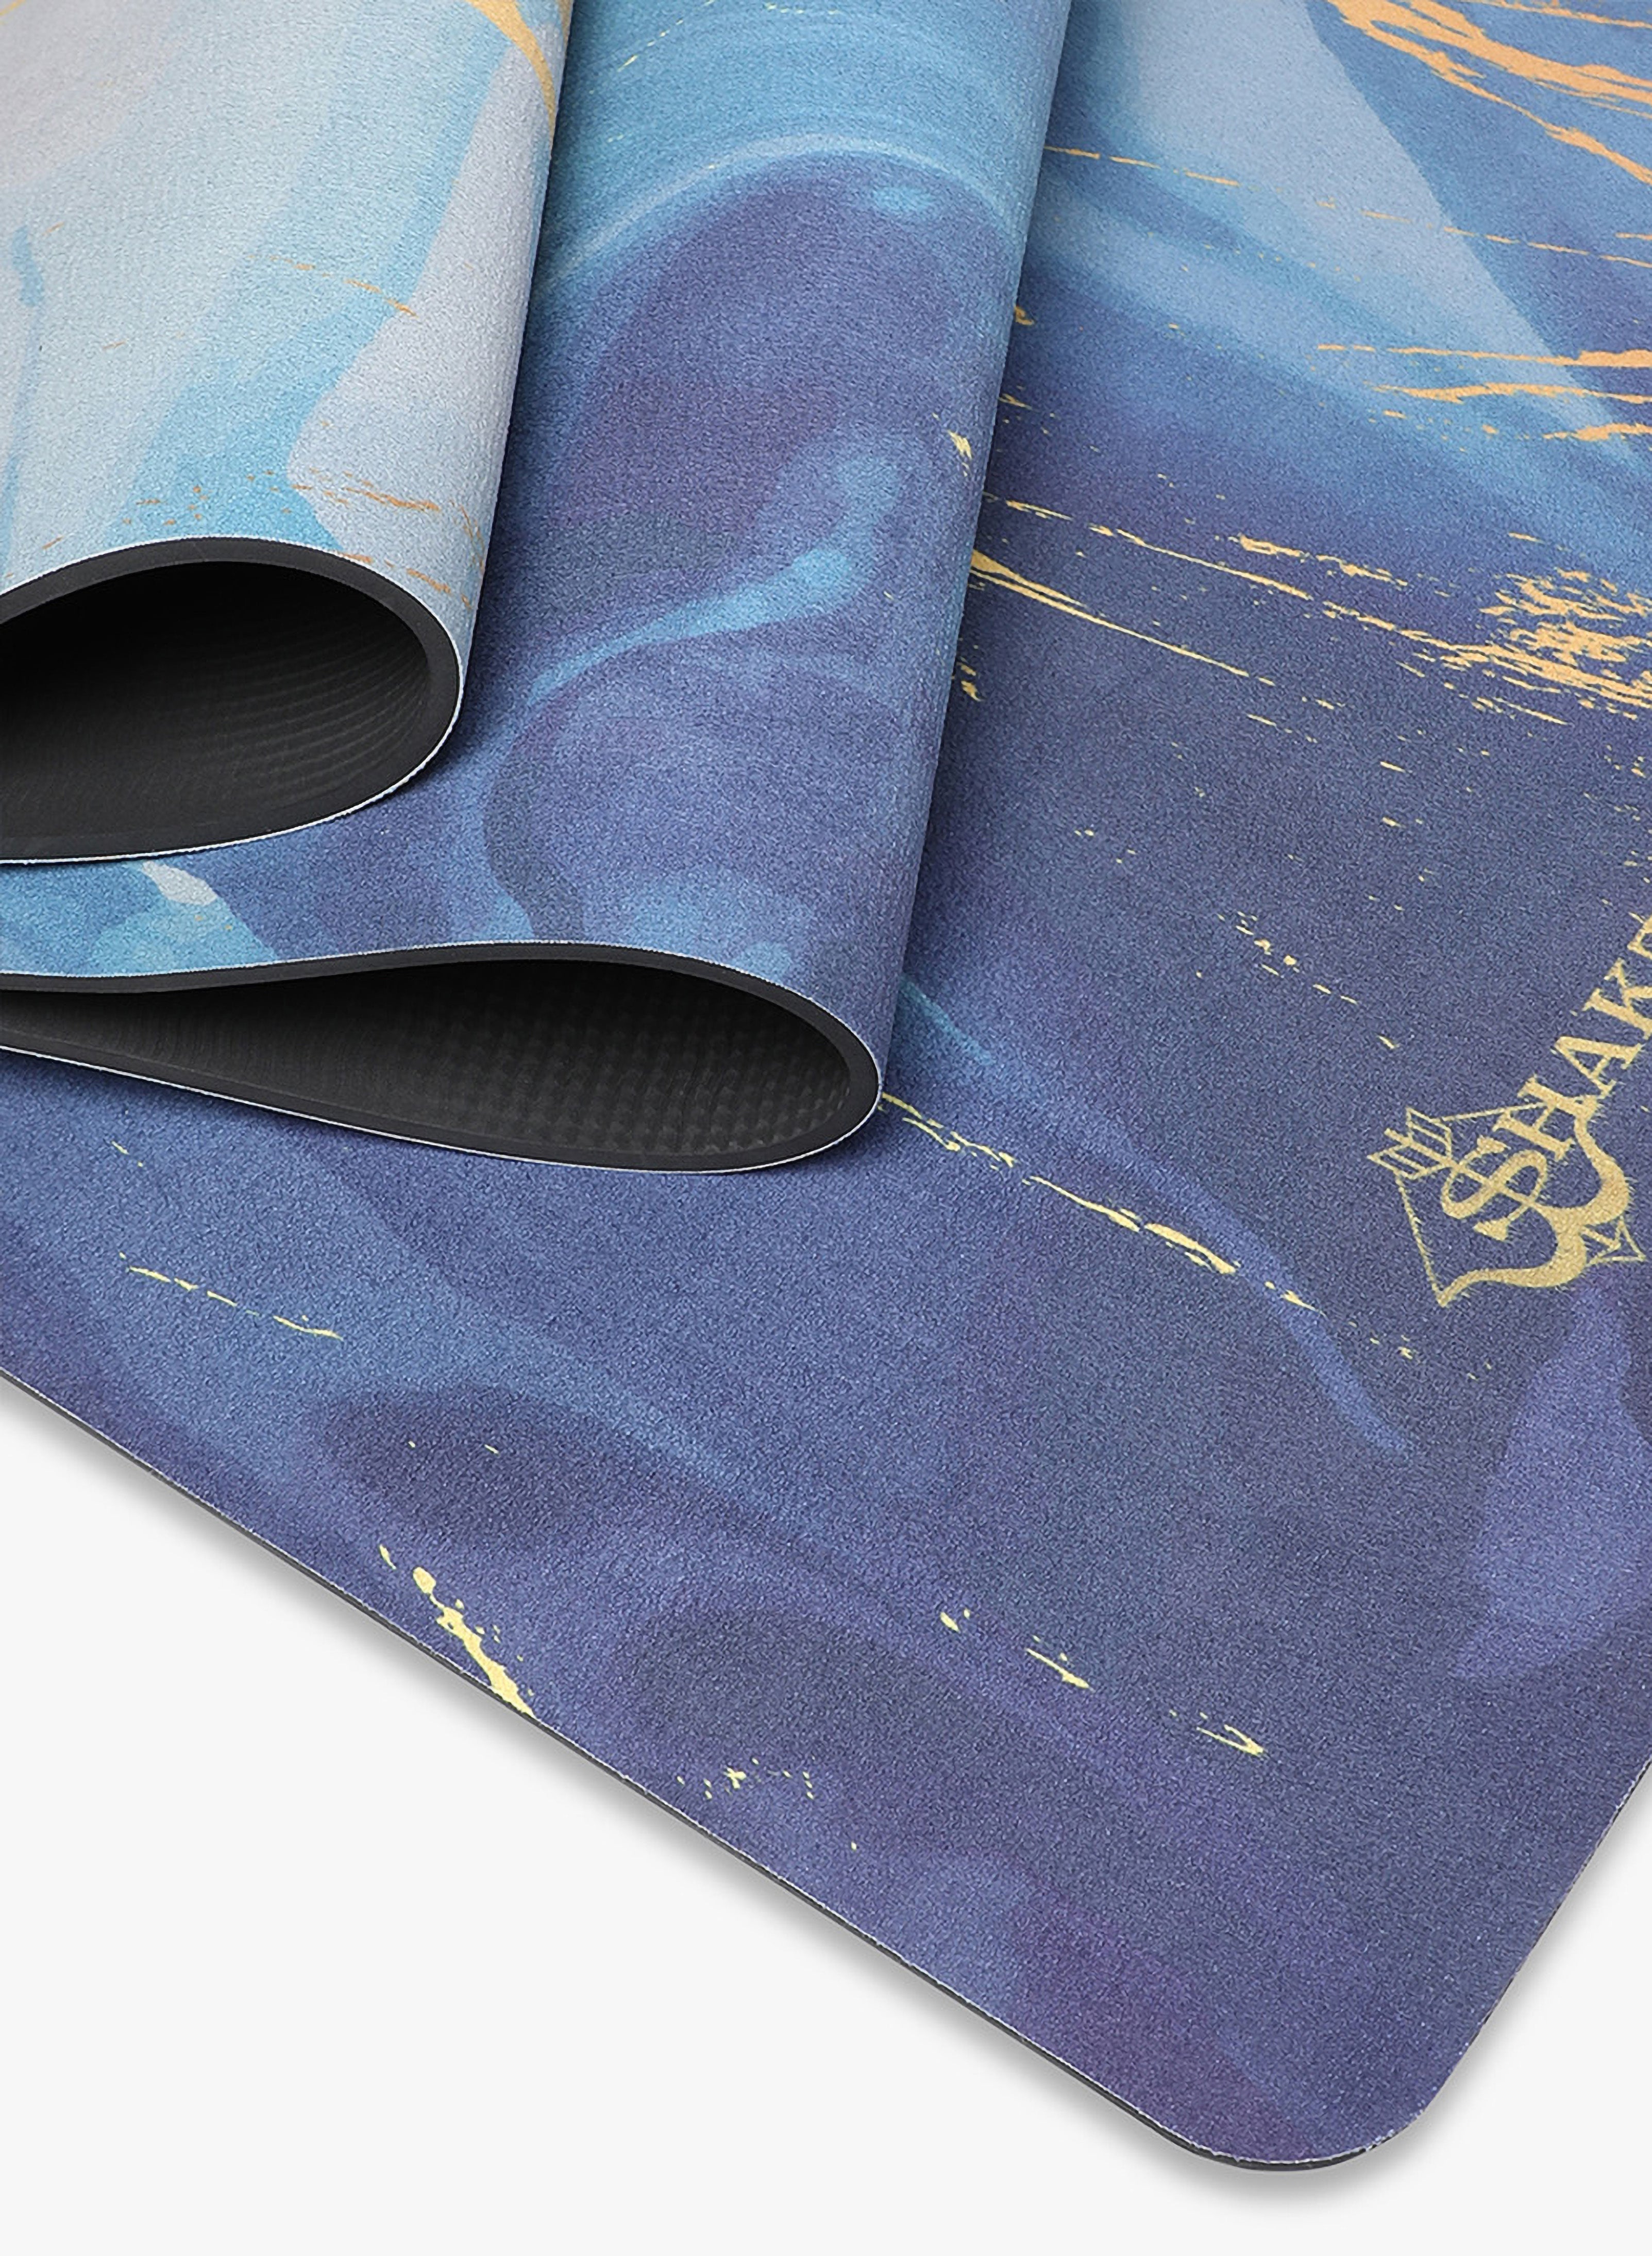 Shakti Warrior Ajna Chakra TPE Yoga Mat - Experience the tranquil energy of the ocean-inspired design. Connect with your intuition and elevate your practice on this eco-friendly mat.